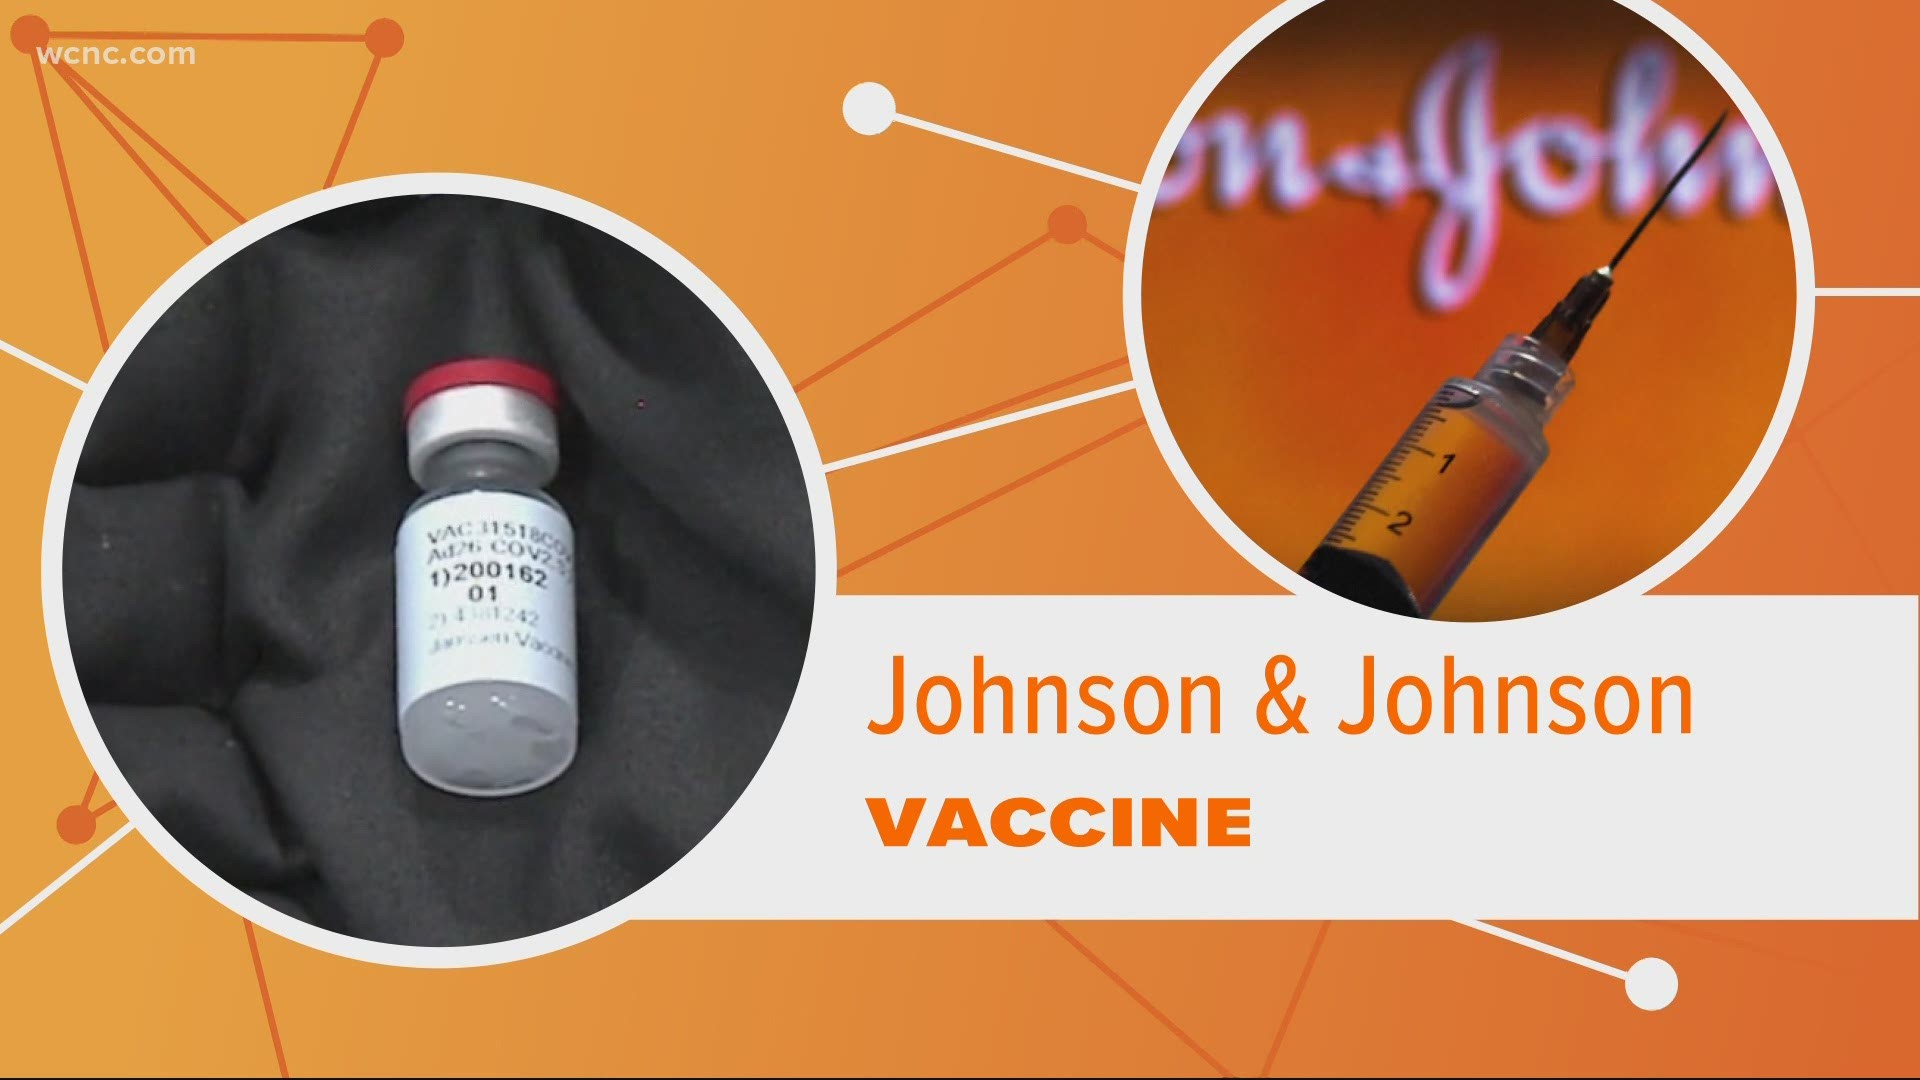 Johnson & Johnson filed for emergency authorization of its COVID-19 vaccine, and experts say this could be a game-changer for ending the pandemic.